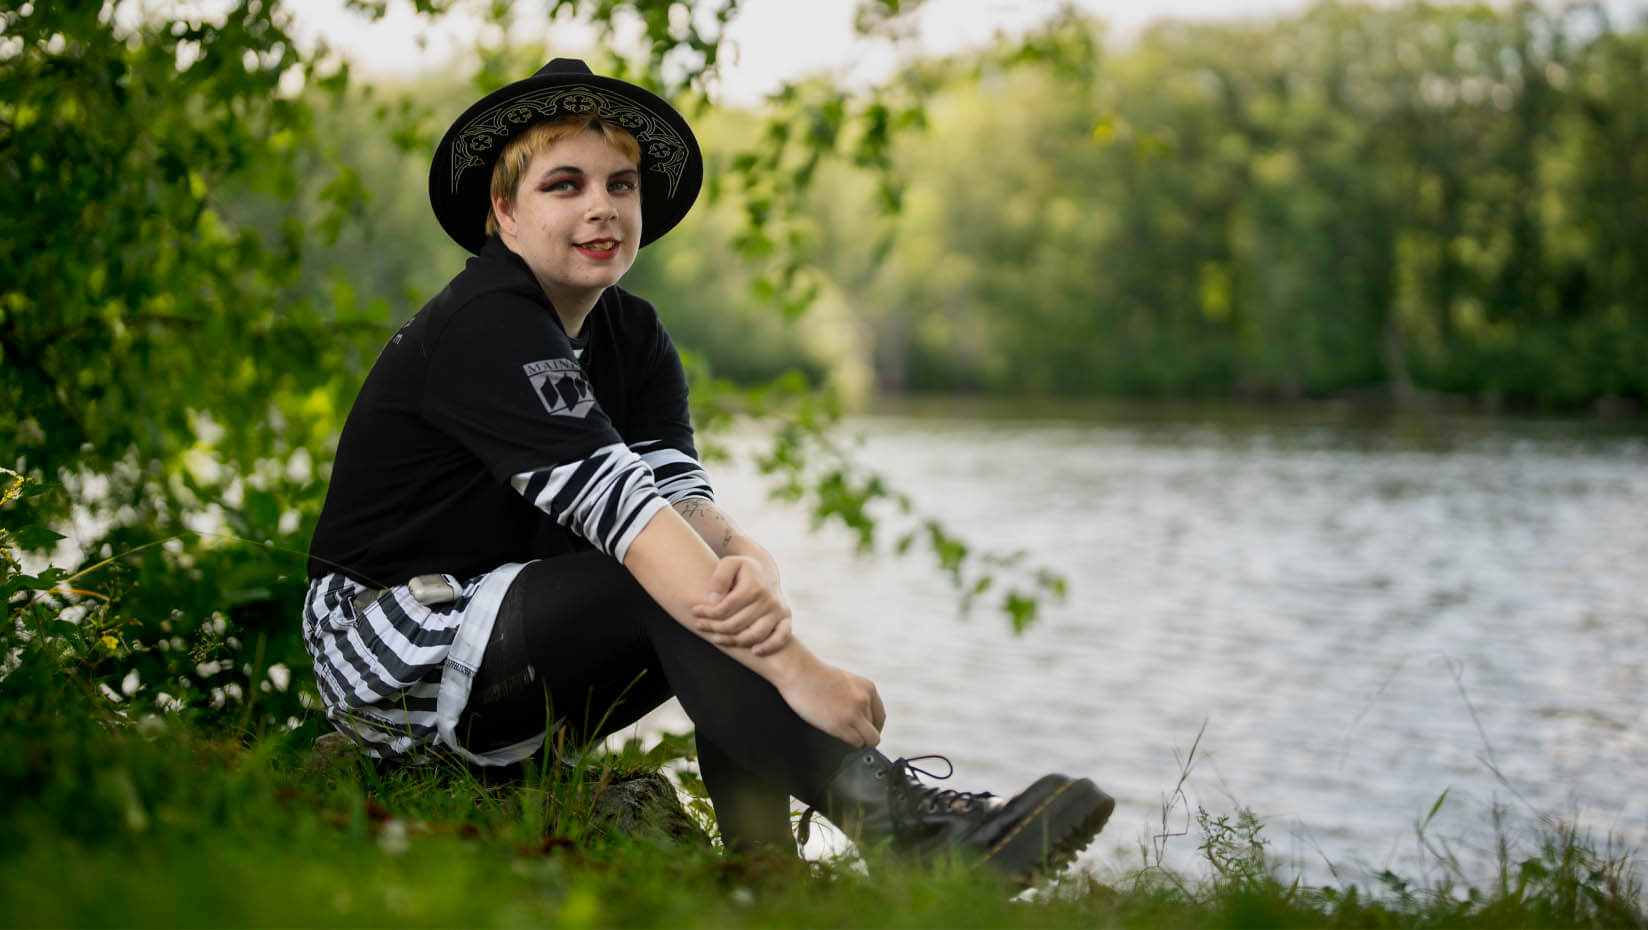 Xander poses by sitting on the bank of a local water way. He is wearing all black and white, including a black fedora and boots. .